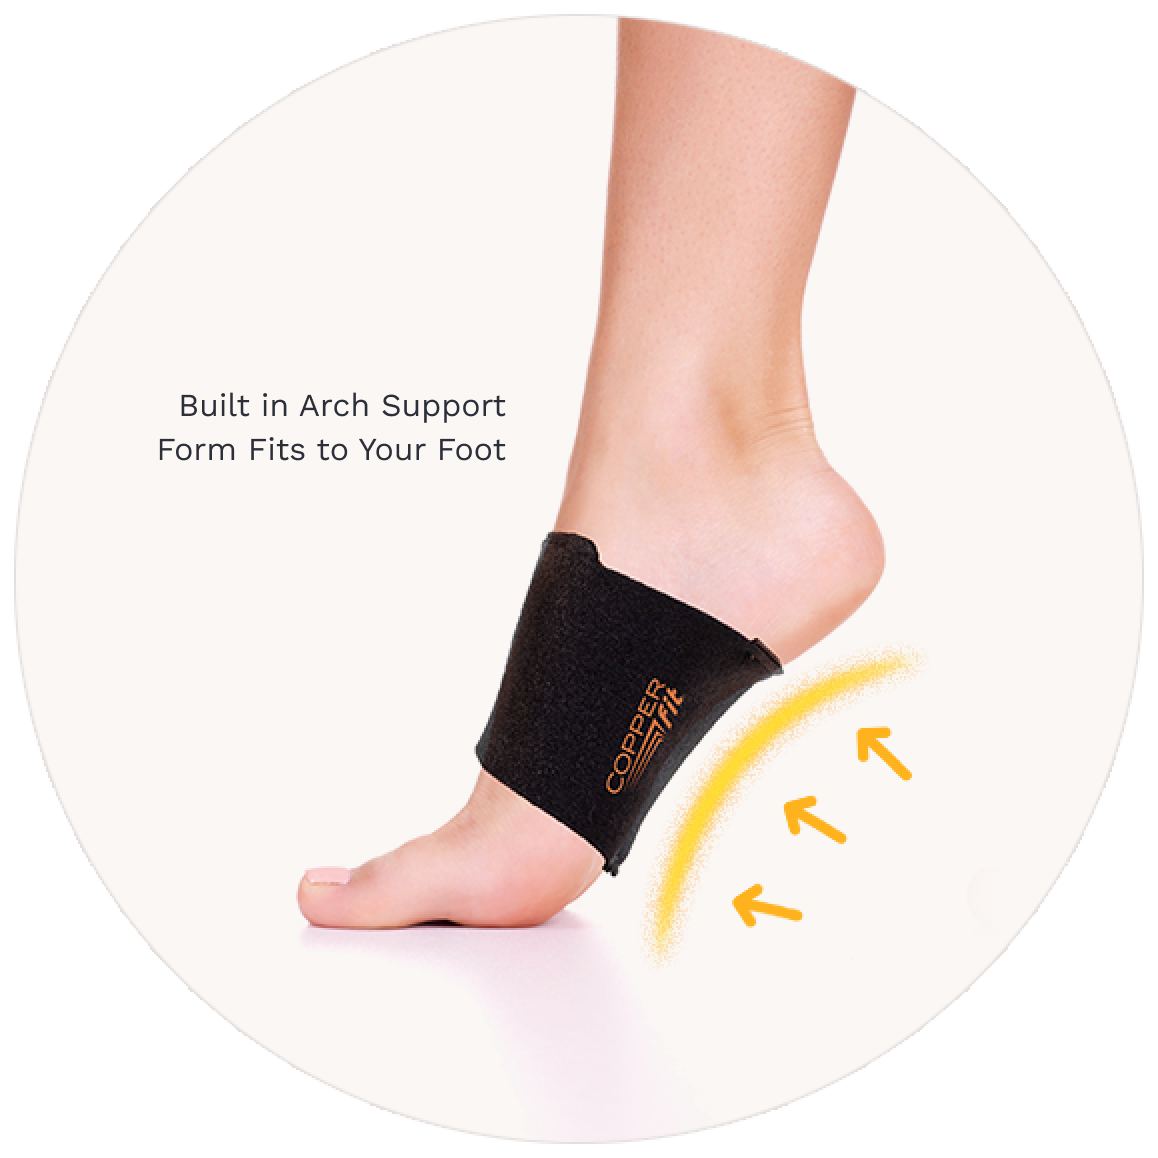 Built in Arch Support Form Fits to Your Foot